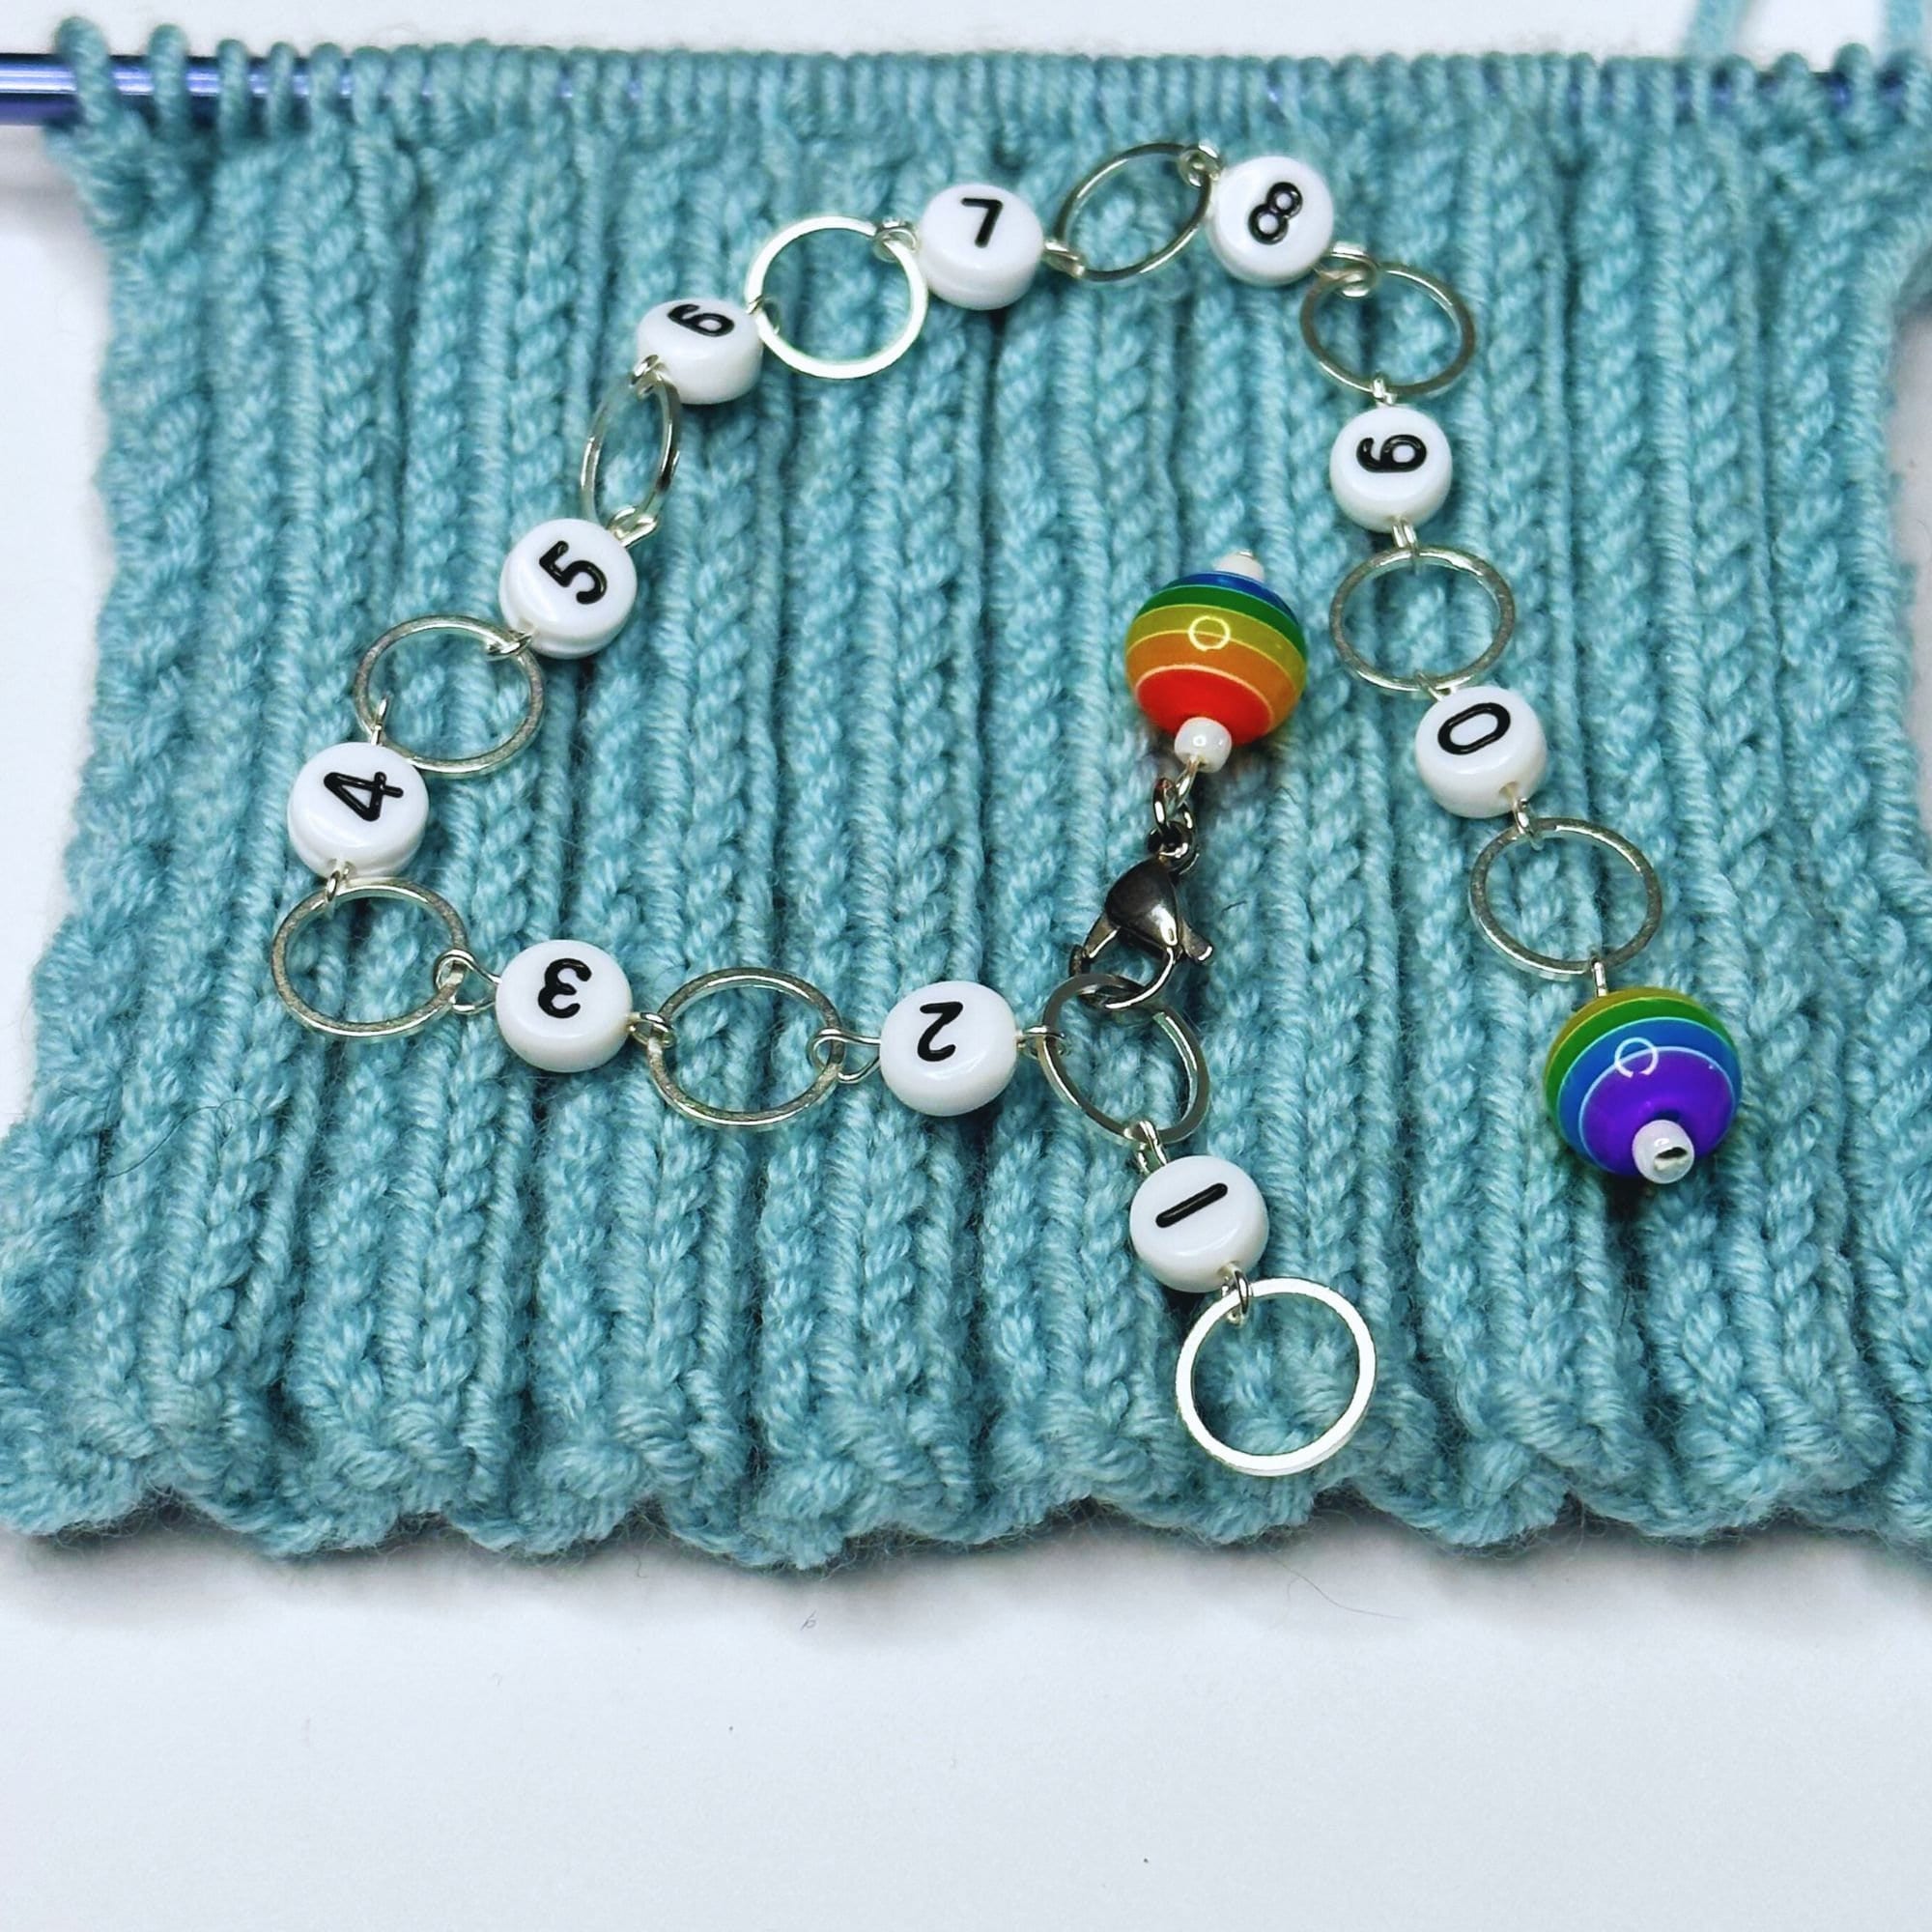 Stitch Markers With Numbers, Progress Keepers, Knitting Row Counter, Fits  up to Us Eight Knitting Needles 